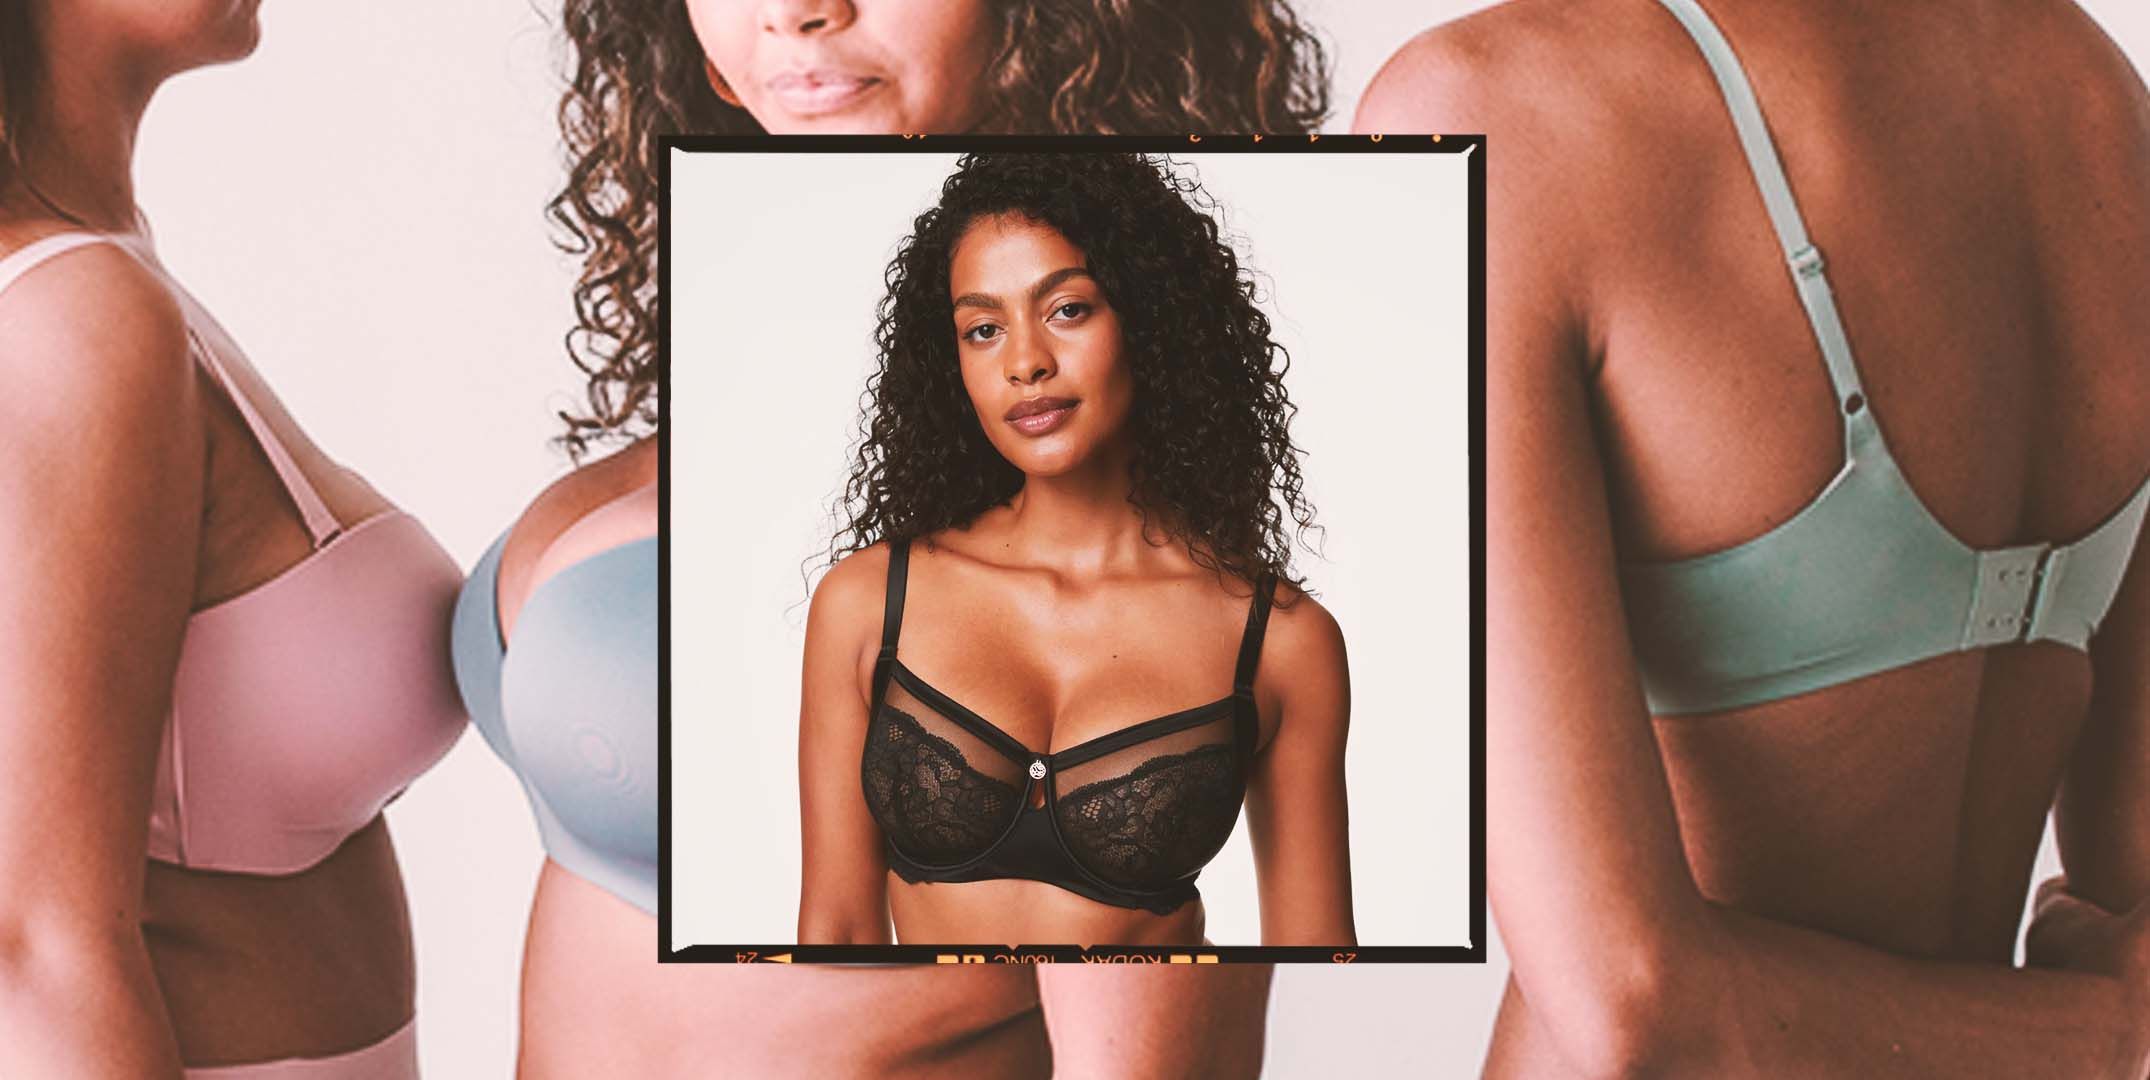 I have natural triple D boobs and found the perfect bras - they're